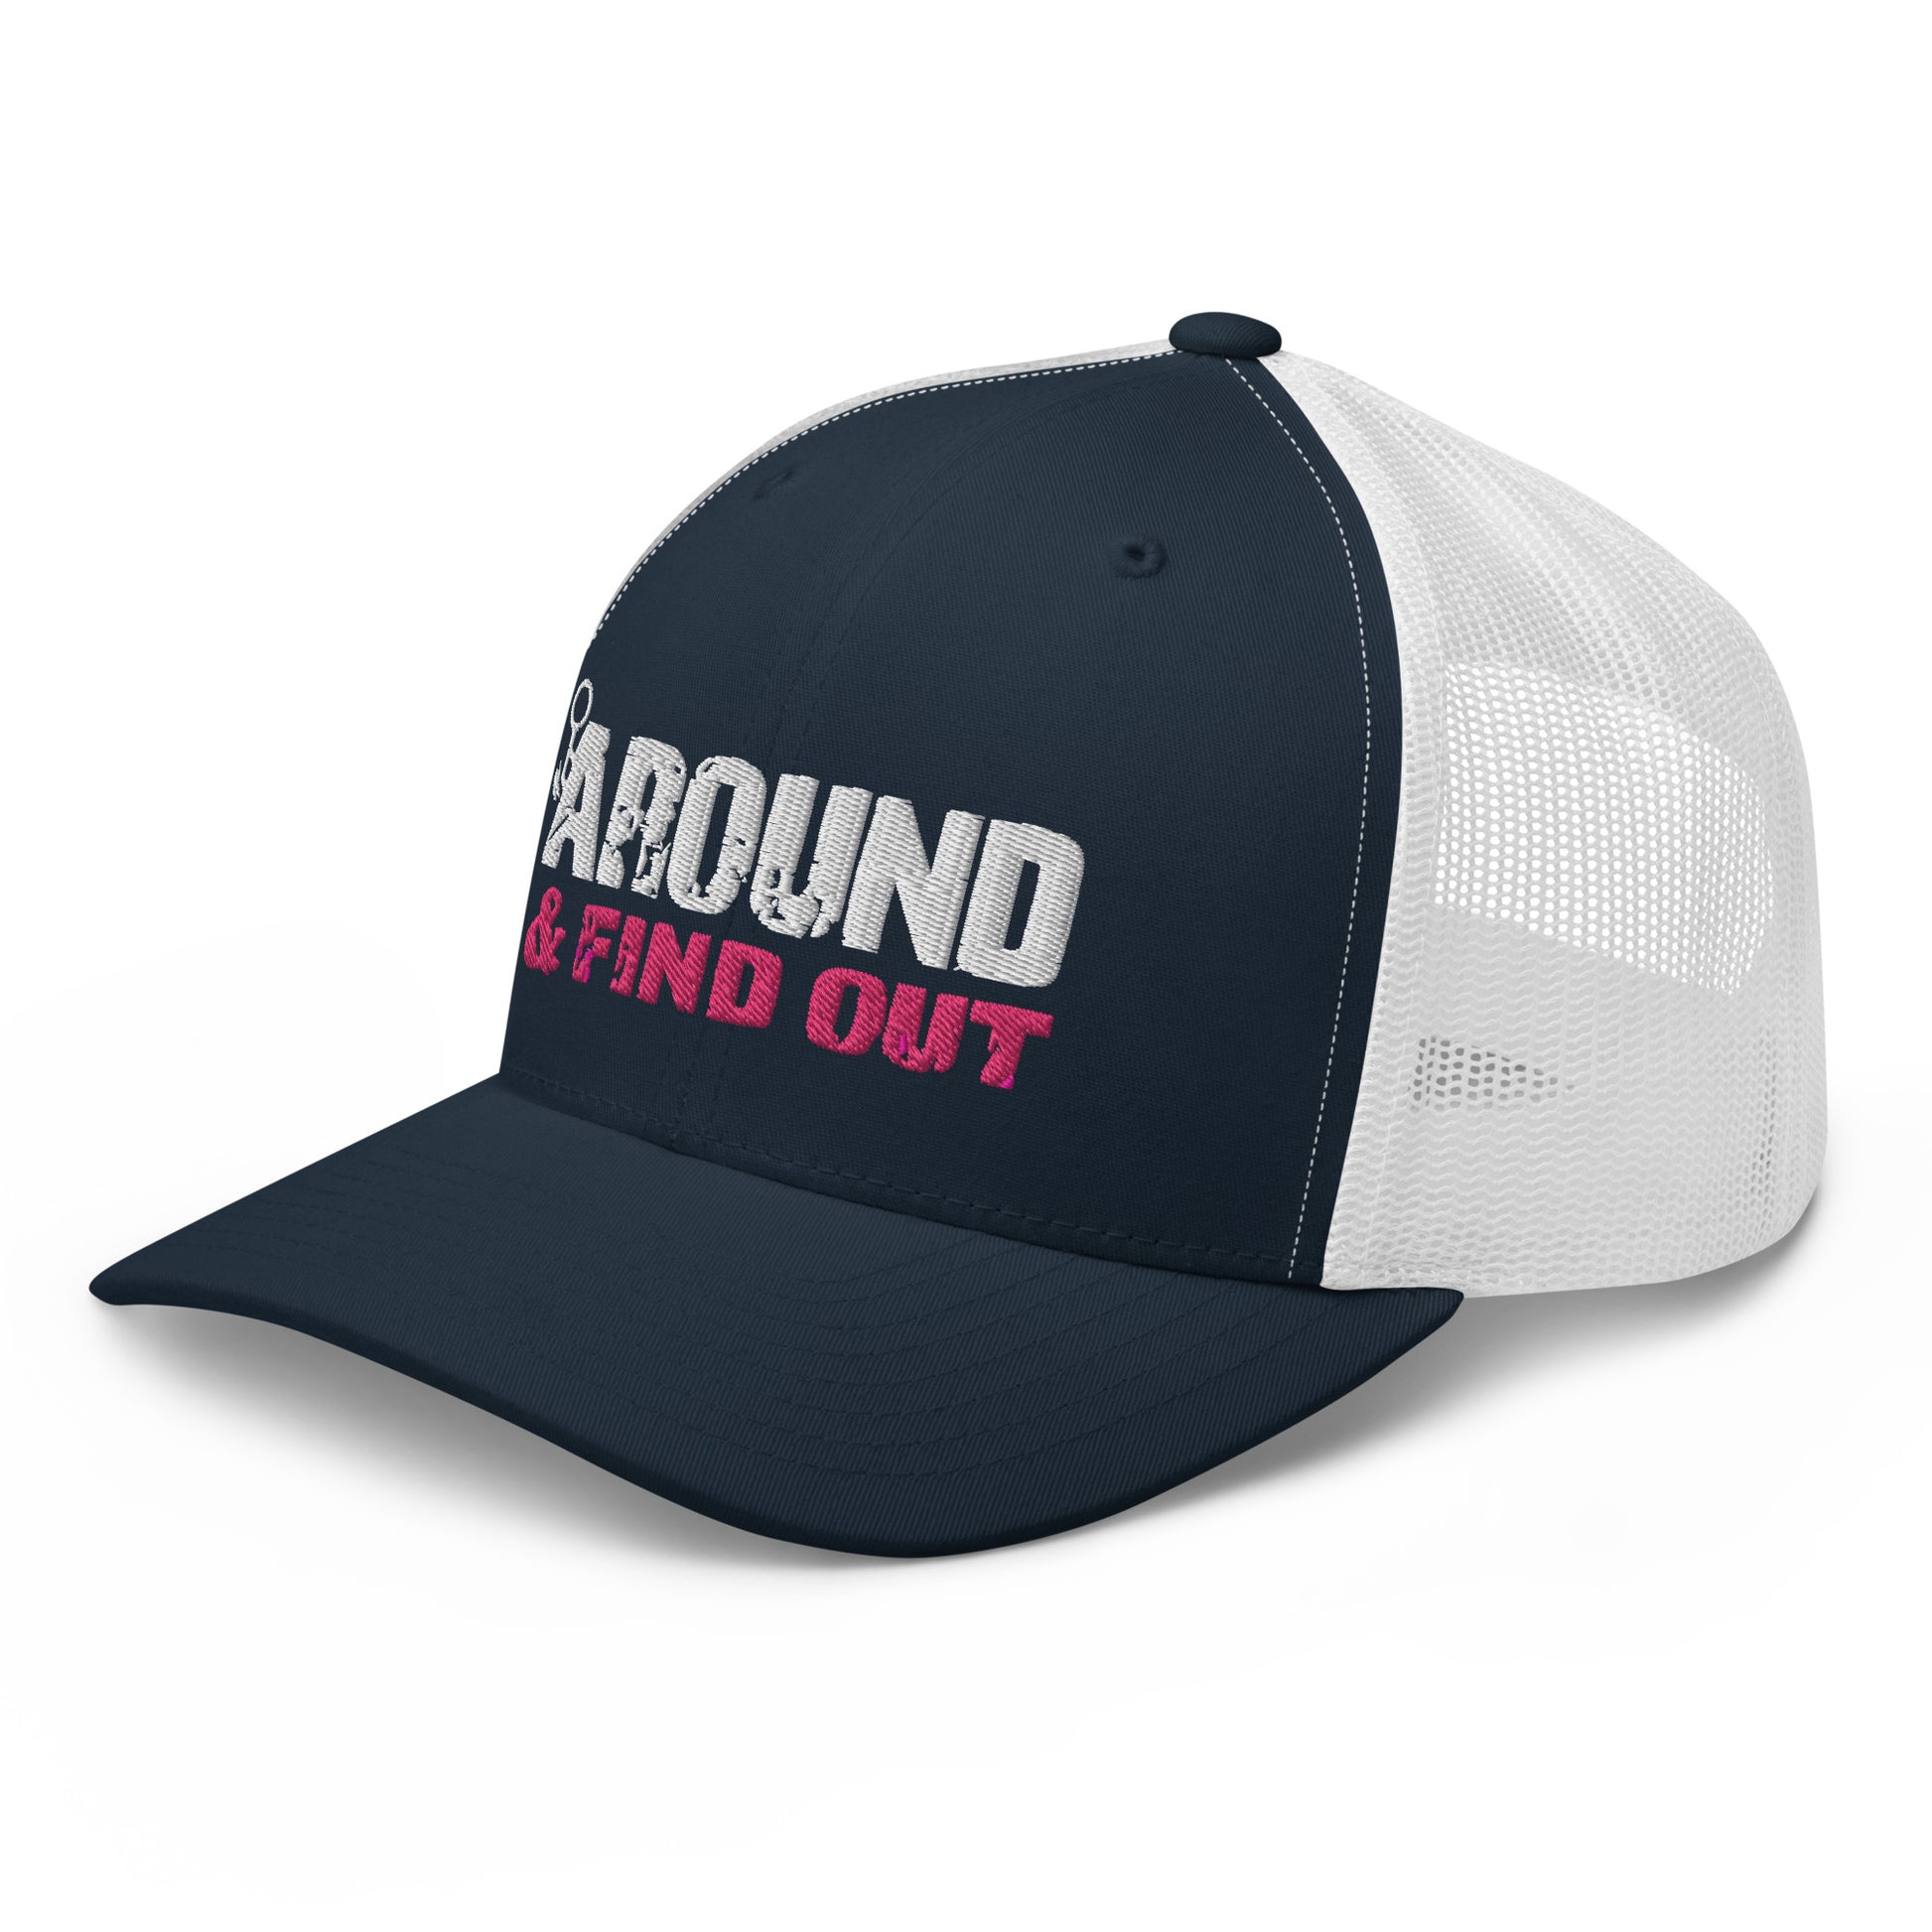 Trucker Cap - Fk Around and Find Out - Pink - FAFO Sportswear